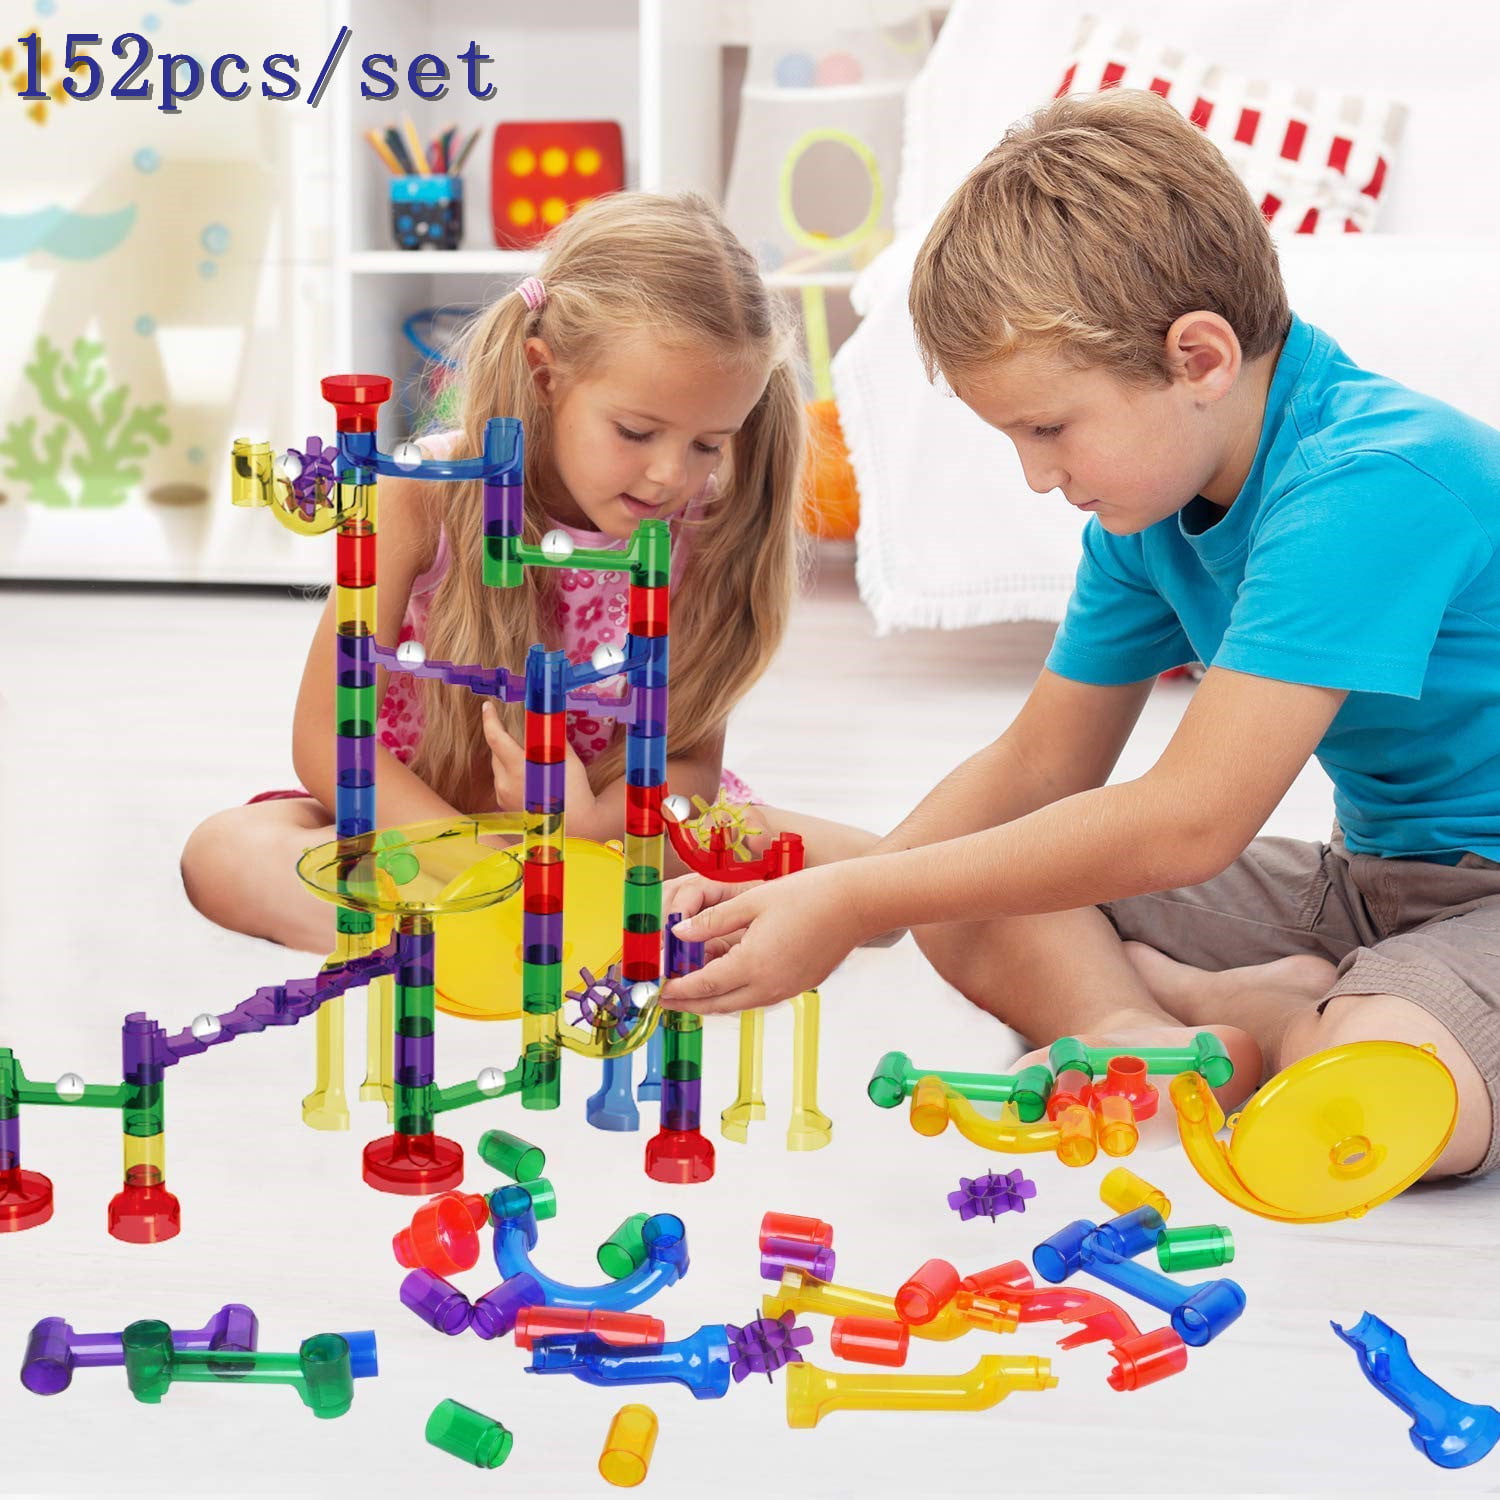 EOYIZW Marble Run for Kids Premium Set 90 Plastic Pieces + 110 Marbles Marbles Run Track Gift for 4 5 6 7 Year Old Boys Girls 200 PCS Marble Runs Maze Game Educational Building Block Toy 